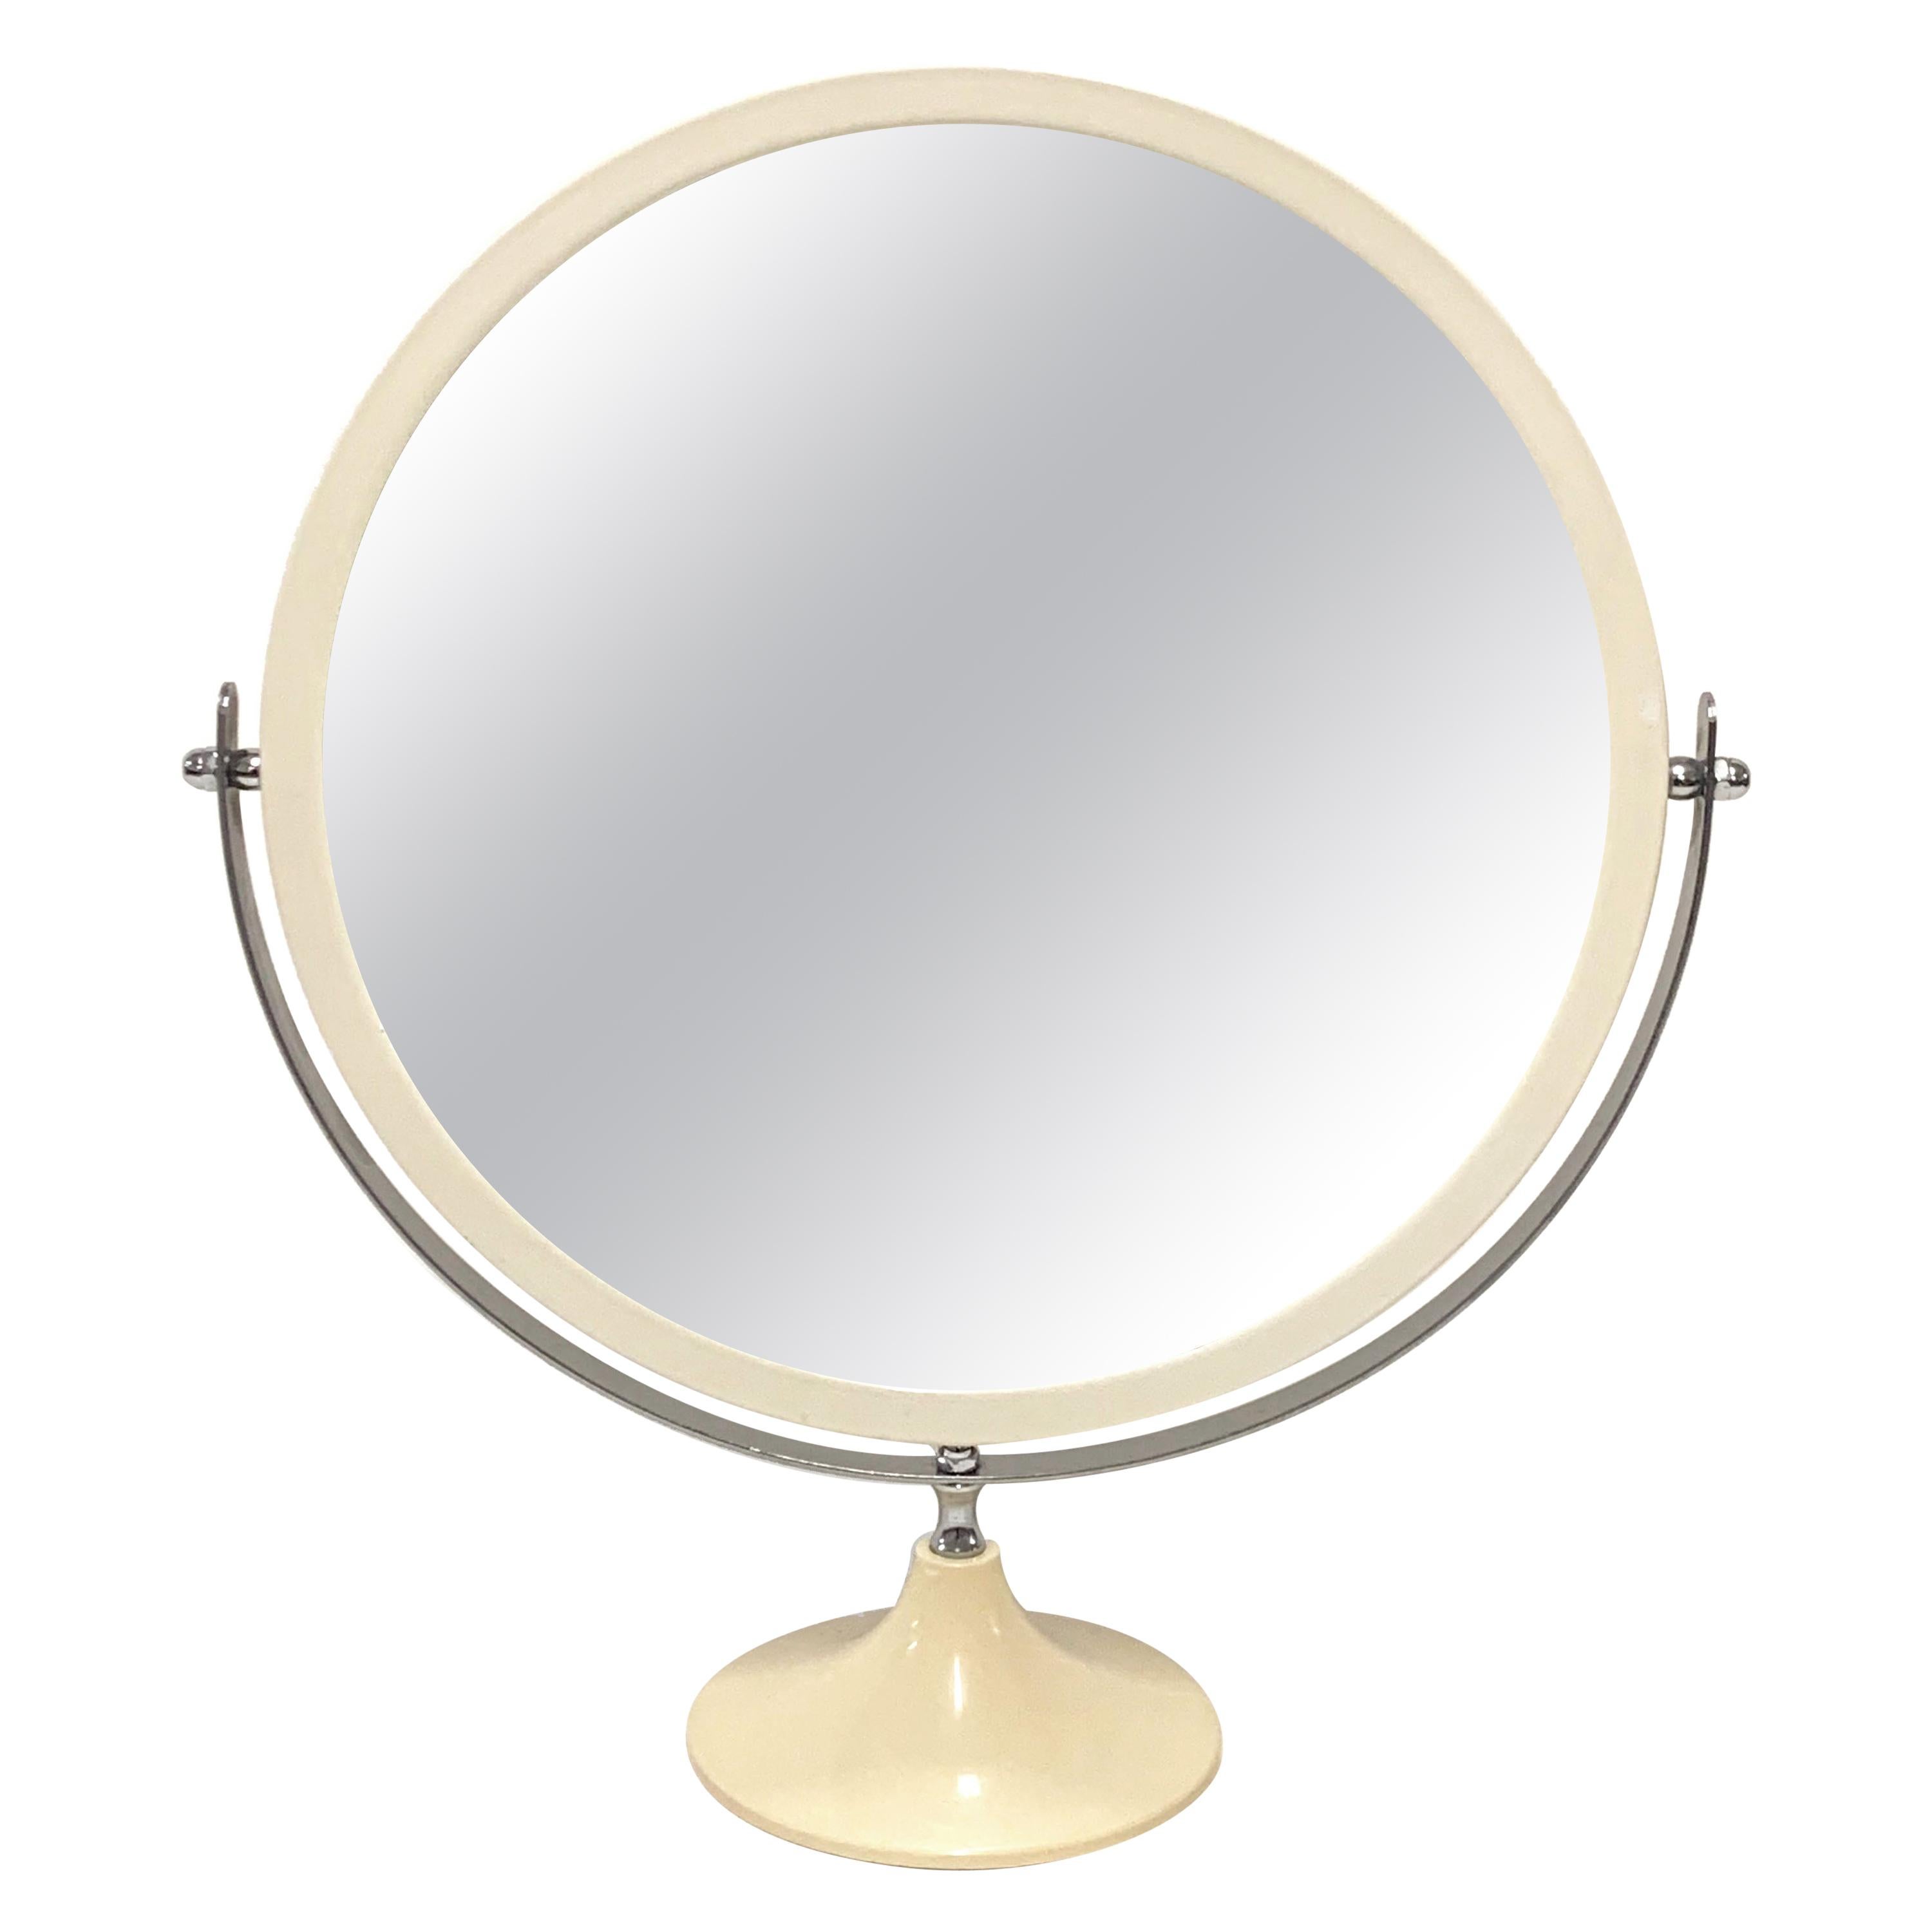 Midcentury Metal and White Plastic Round Italian Table Mirror, Italy, 1980s For Sale